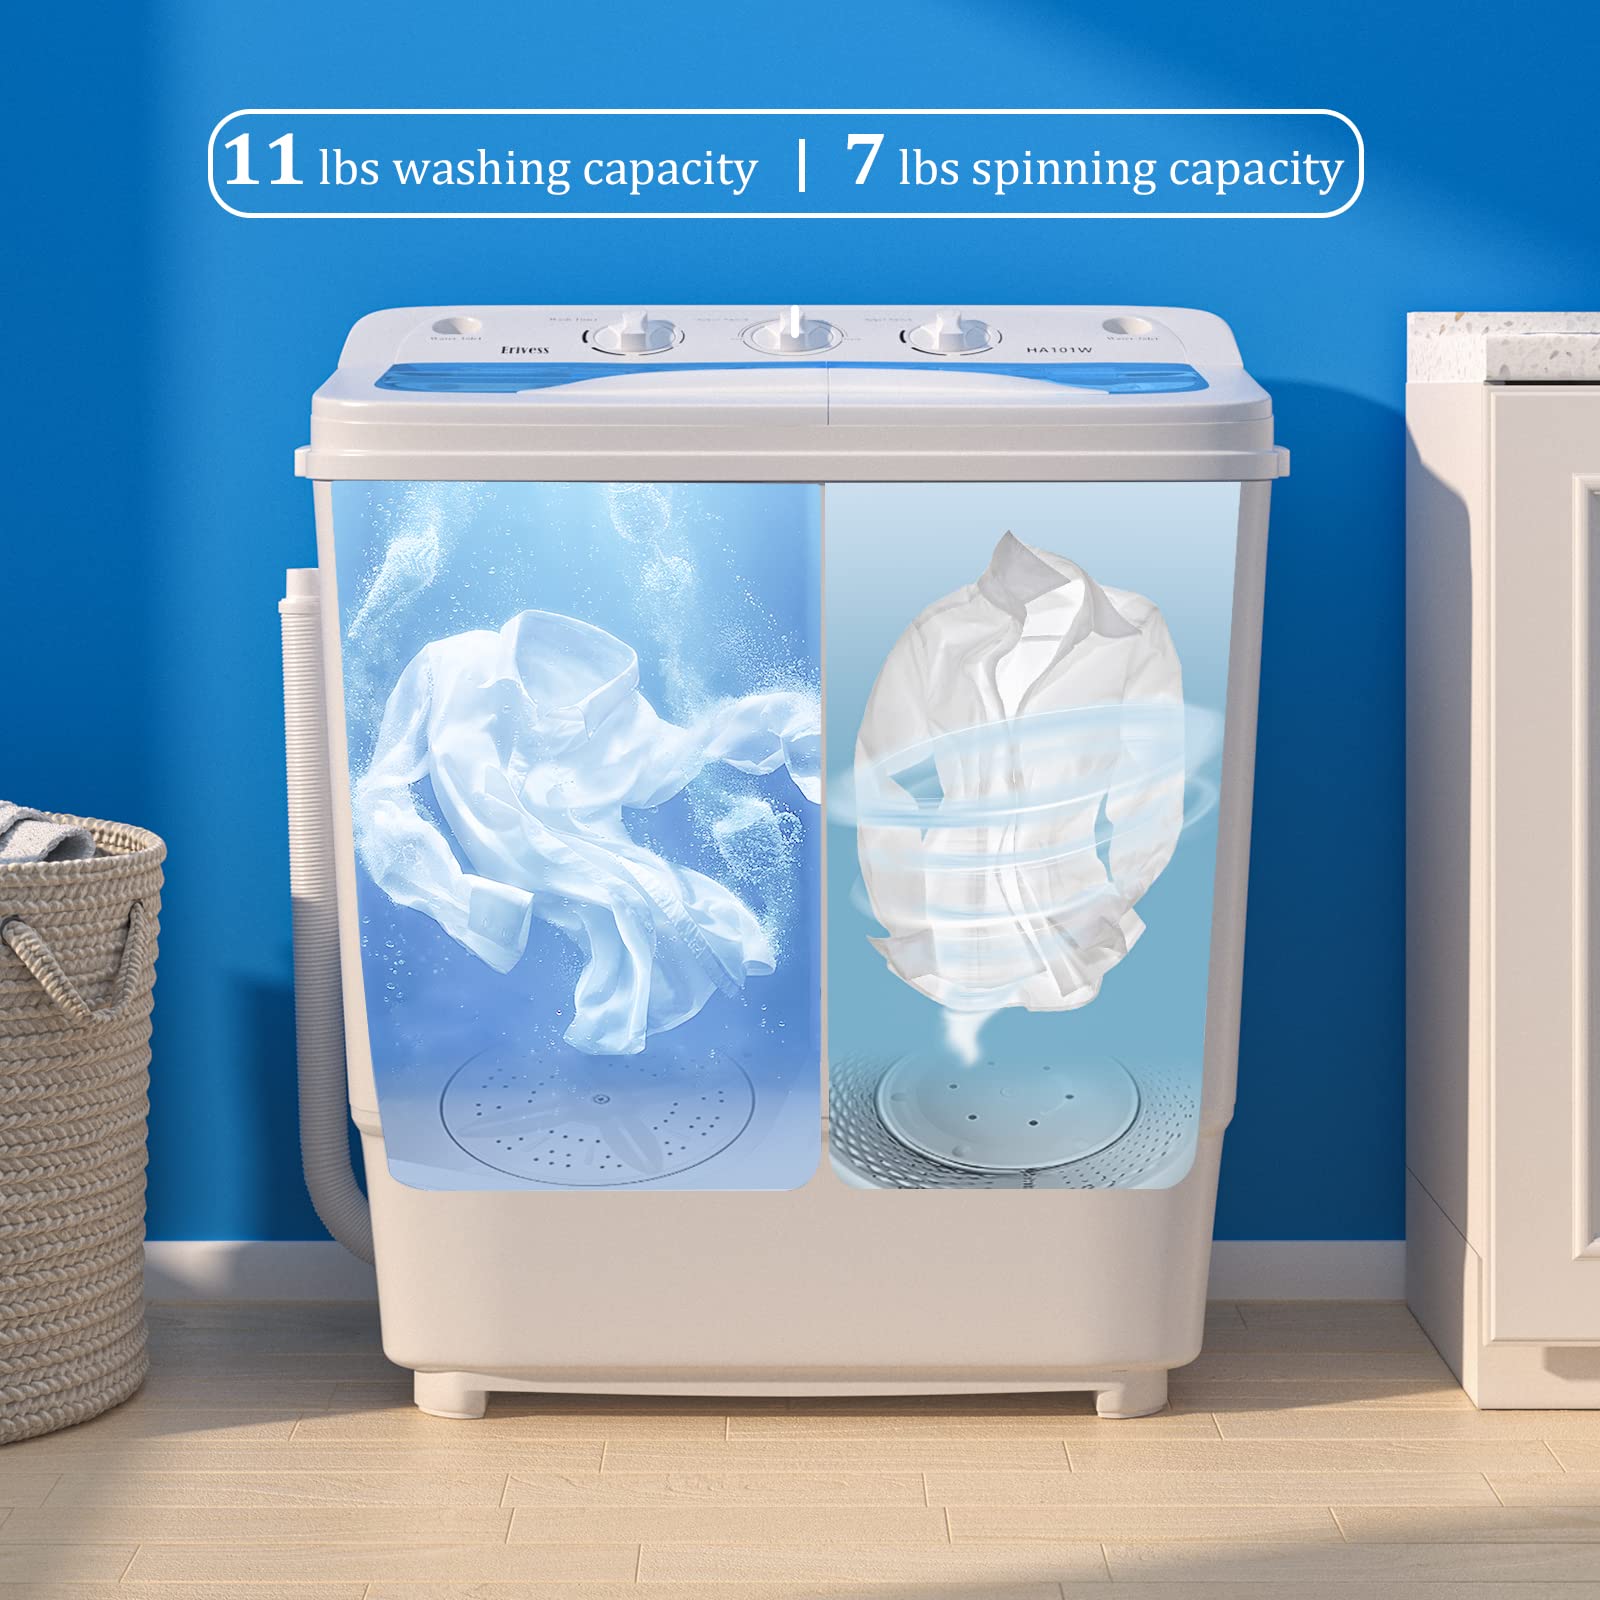 Erivess Portable Twin Tub Washing Machine, Buy 1(washer) Get 1(Dry Rack) Free! 11lbs Washer Mini Compact Laundry Machine and 7lbs Spinner, Semi-automatic Washer Combo for Dorms, Apartments(white)